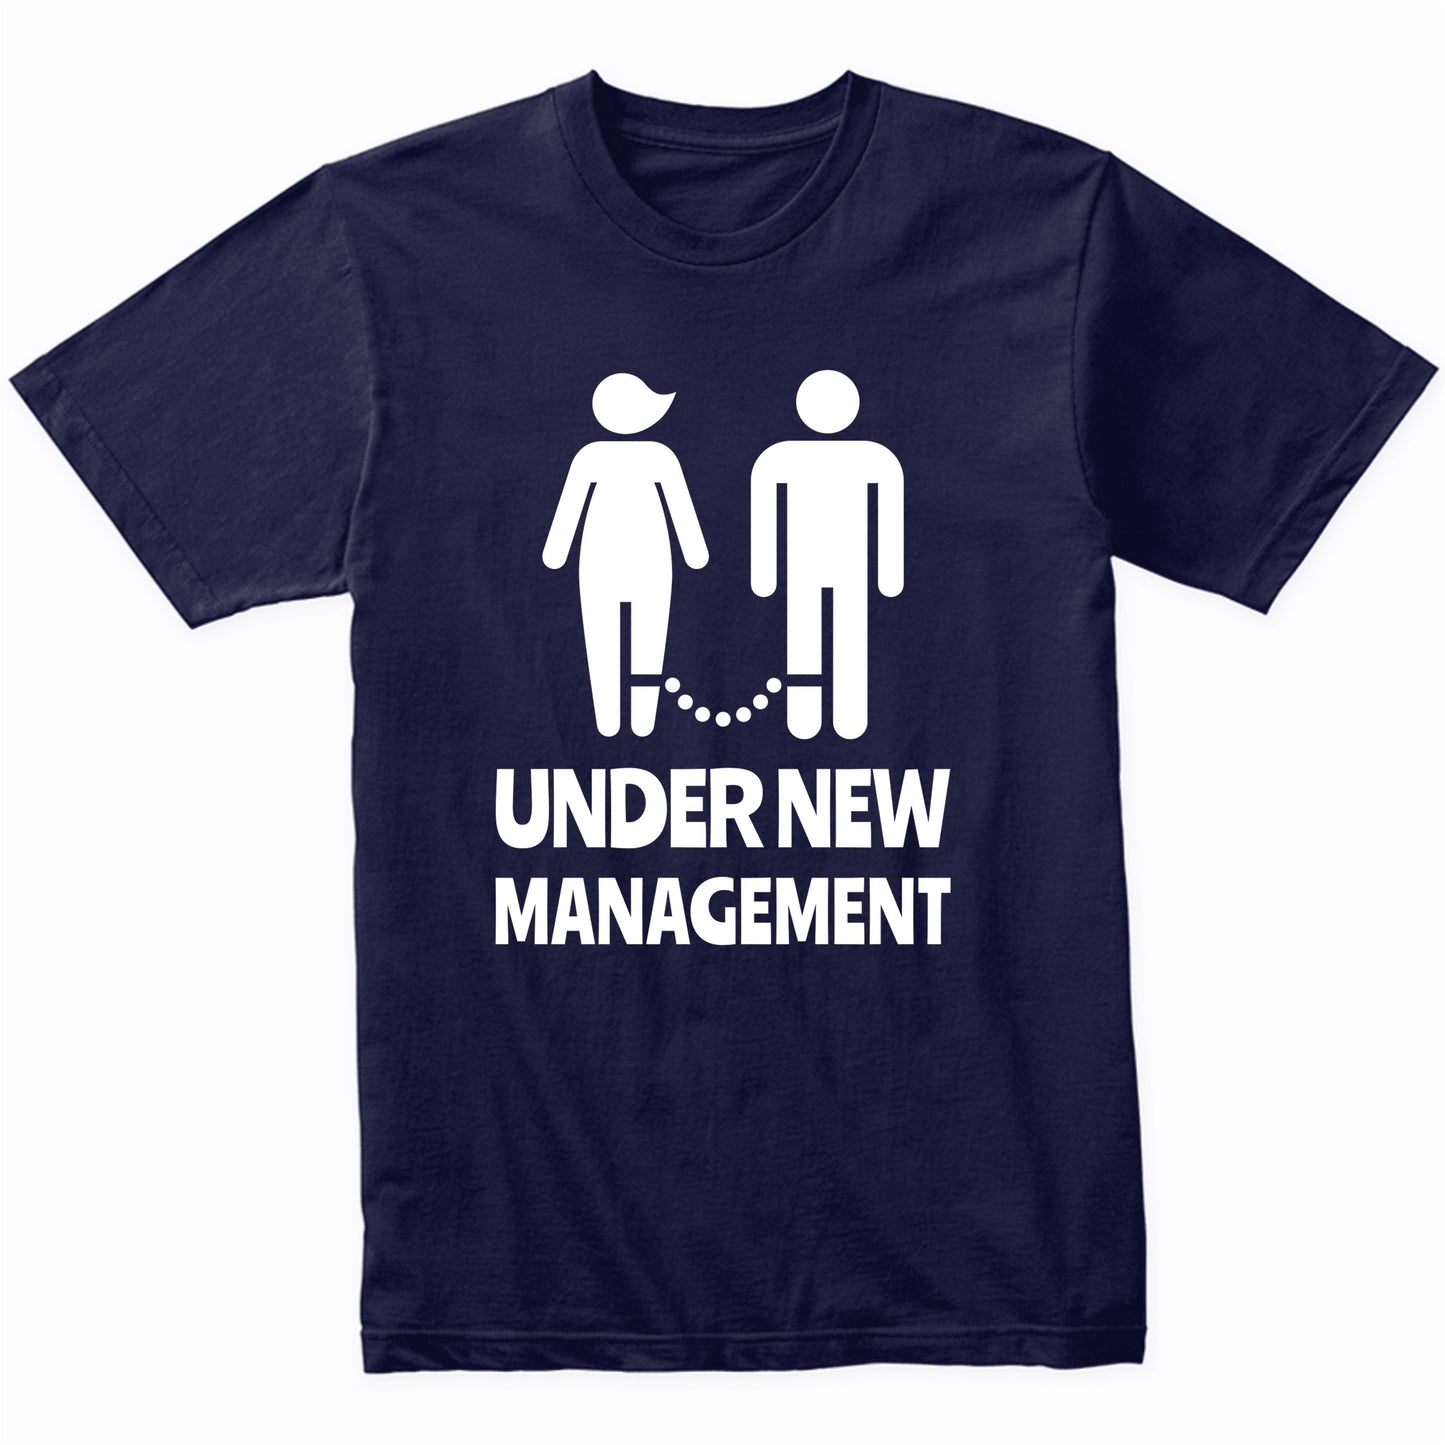 Funny Bachelor Party Shirt For Groom - Under New Management